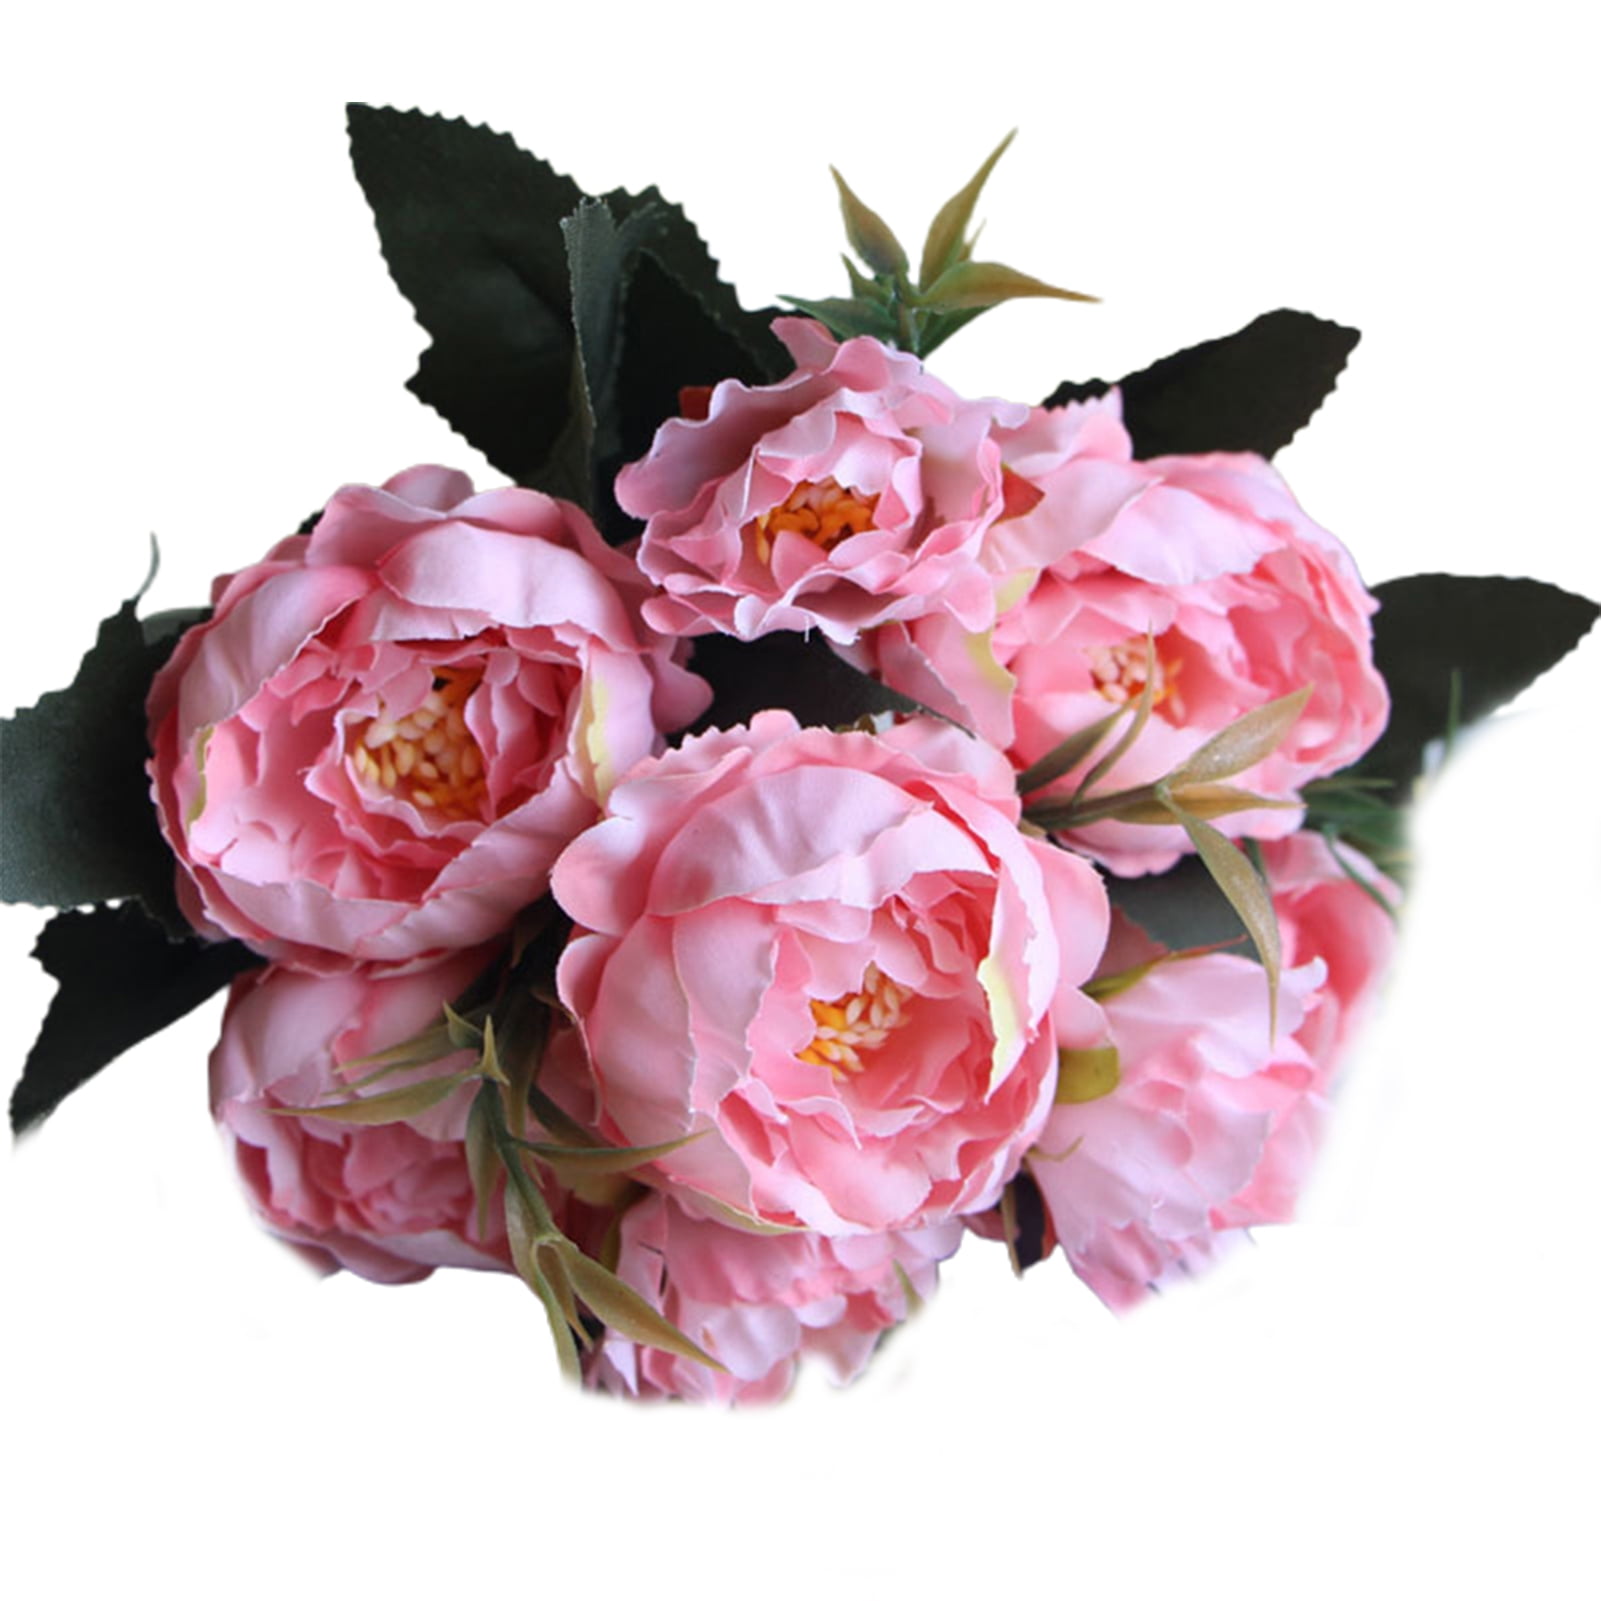 Details about   10-Inch tall Silk Artificial Peony Flowers Bouquet Wedding Home Centerpieces 